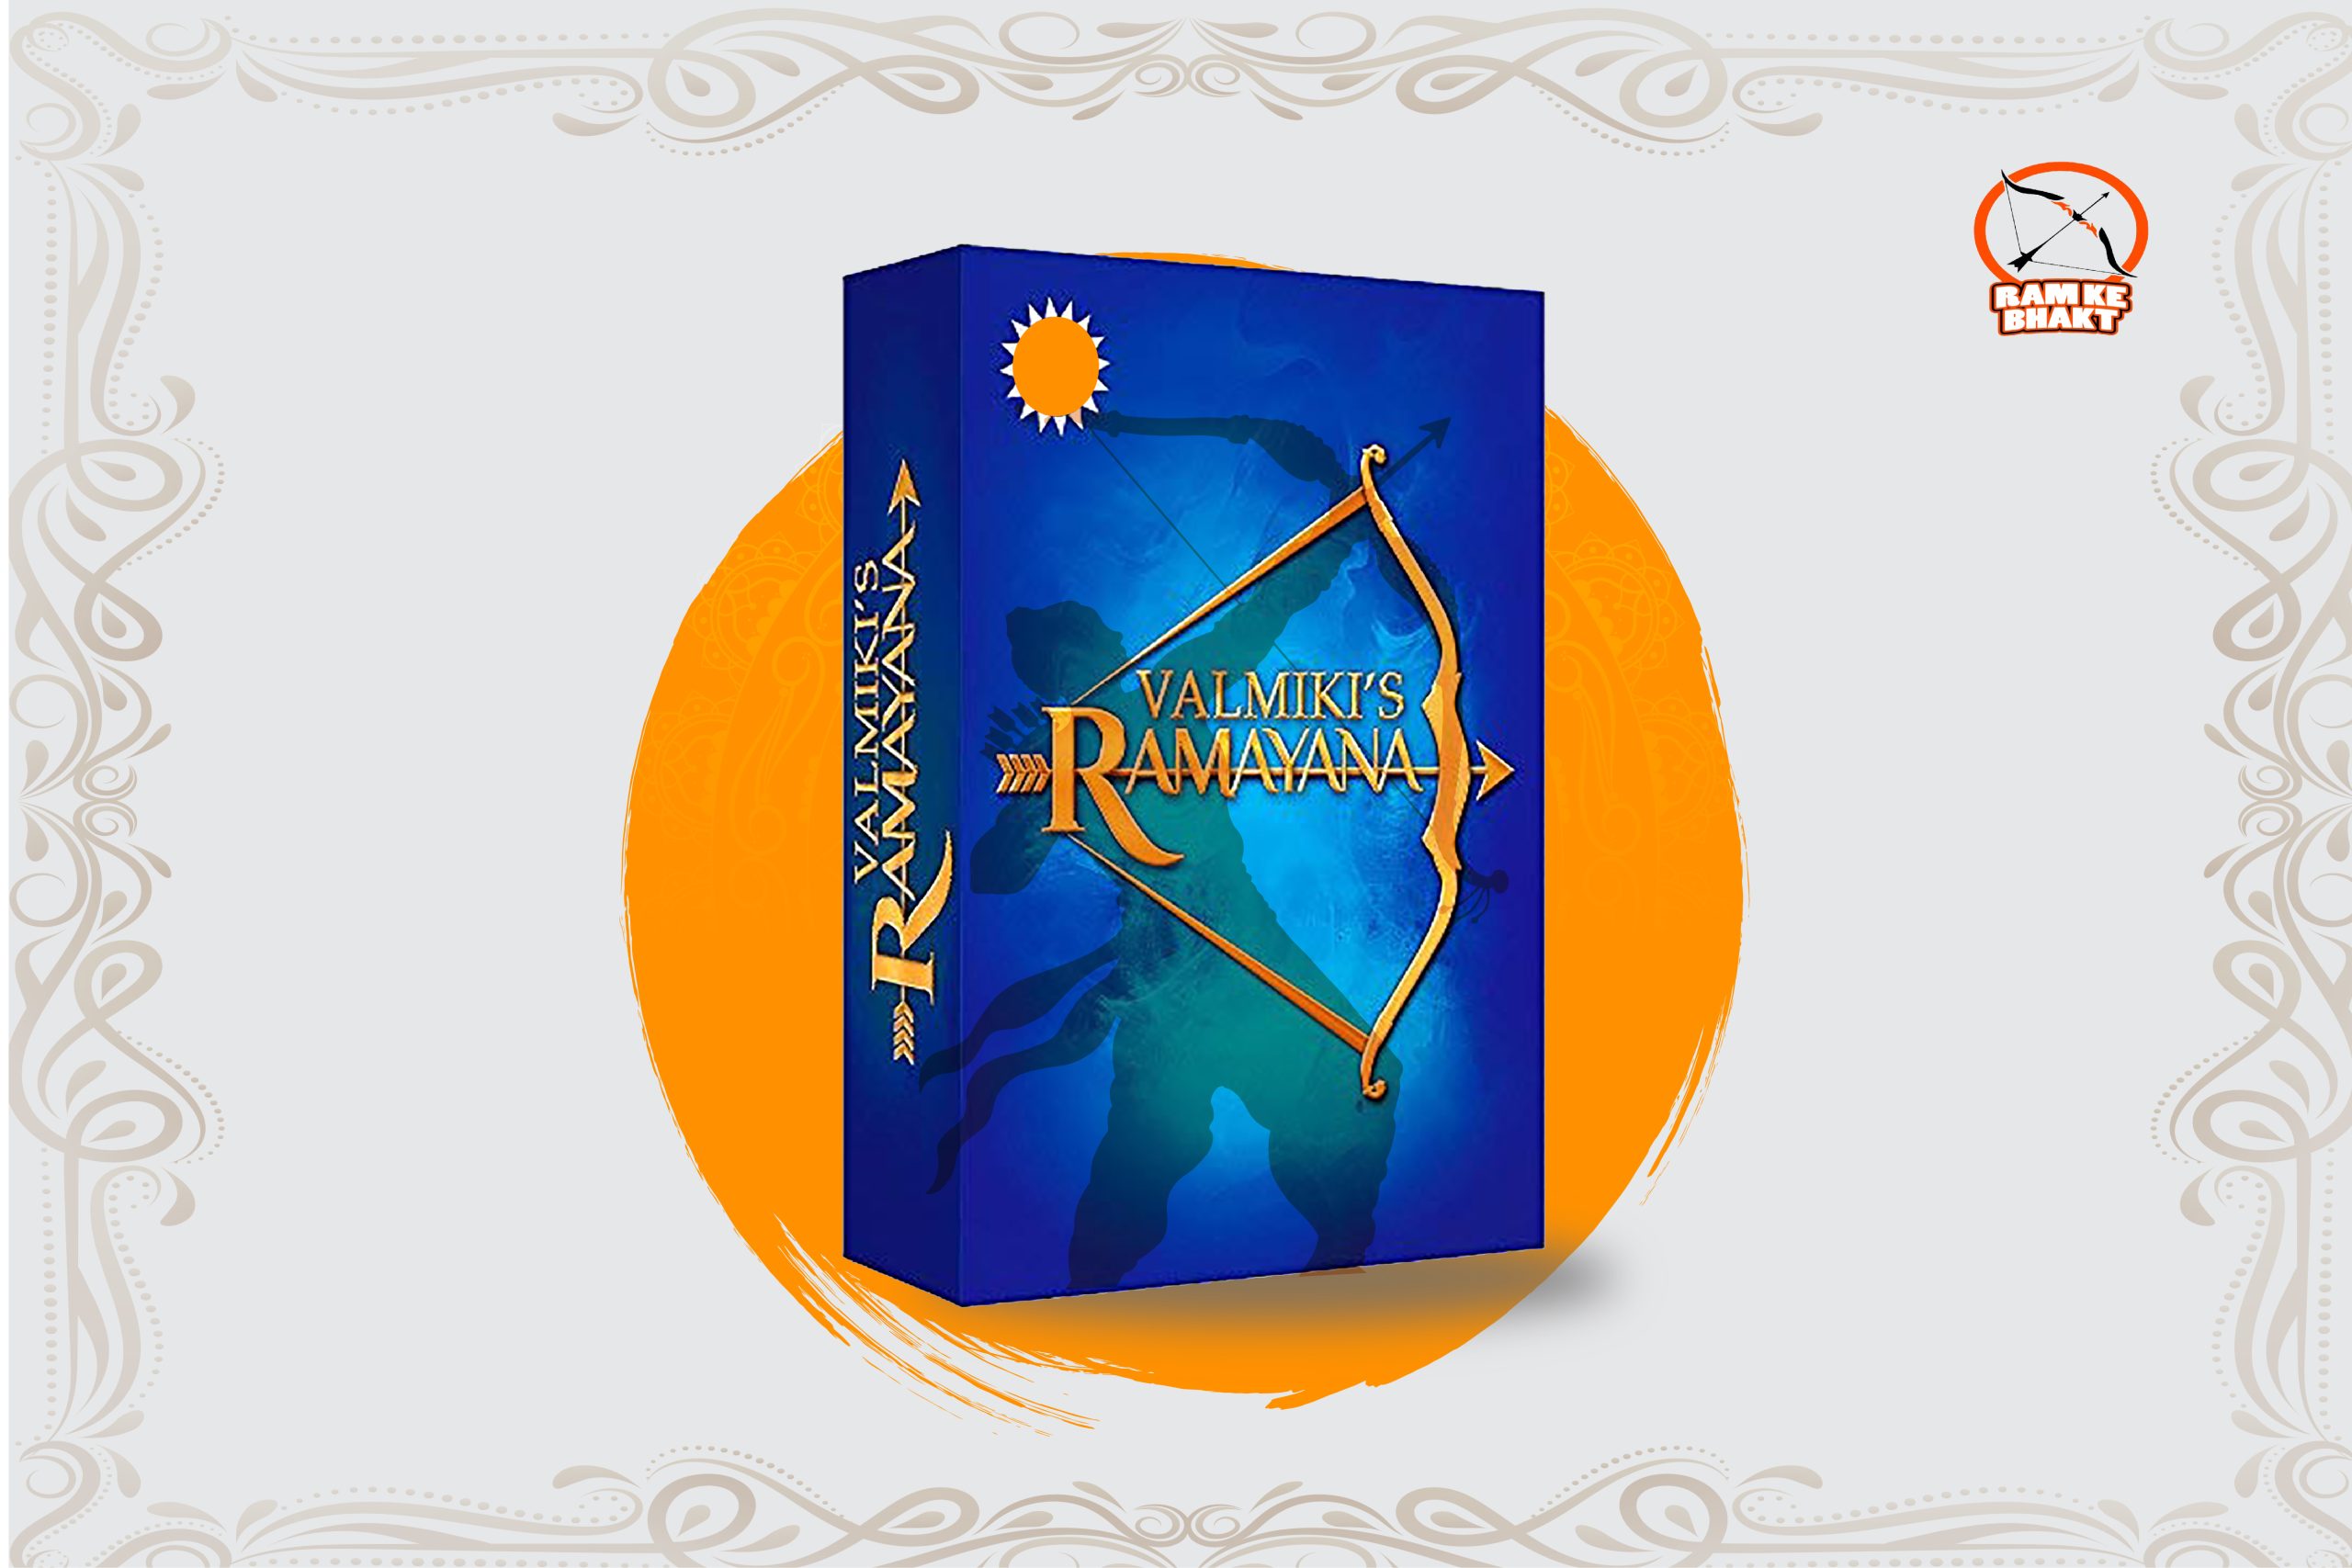 Why Ramayana Book Is So Important To Hindus